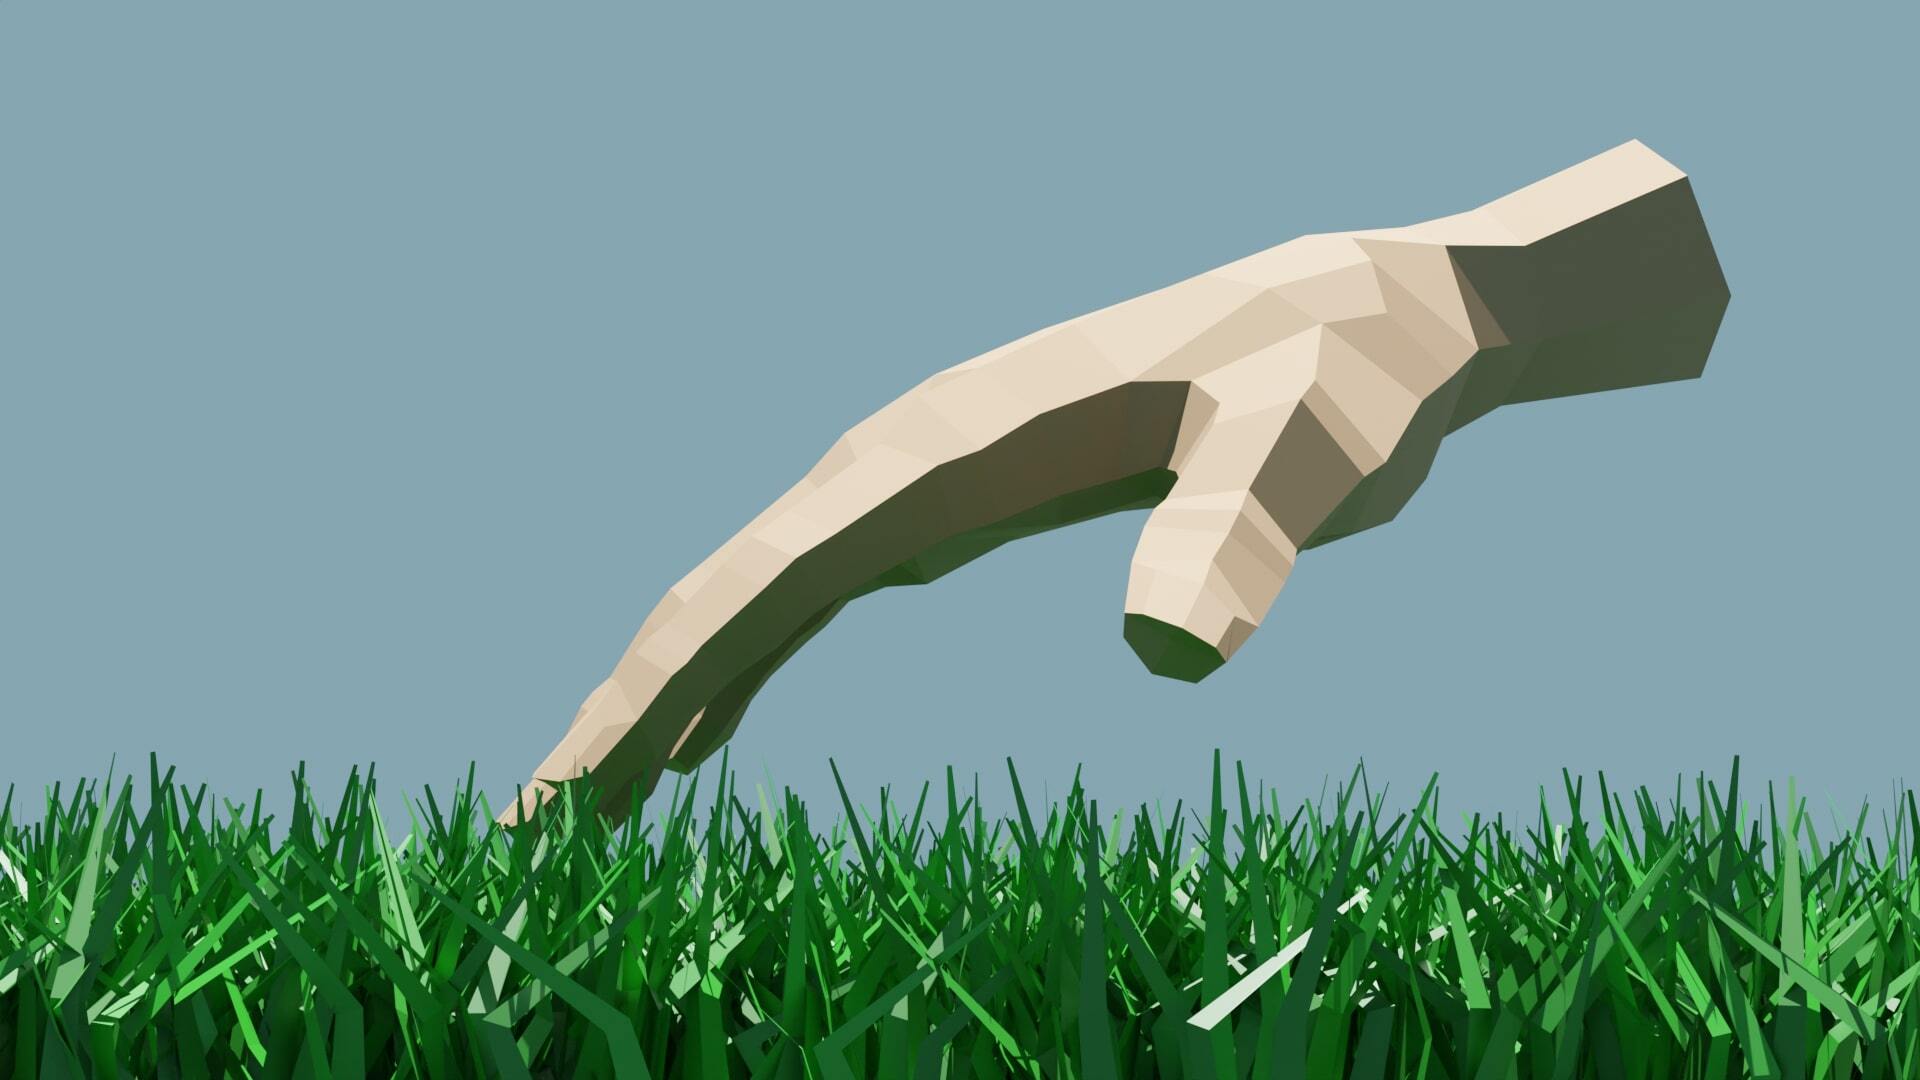 touch grass simulator by yoshi covered in asbestos and mold - Play Online -  Game Jolt